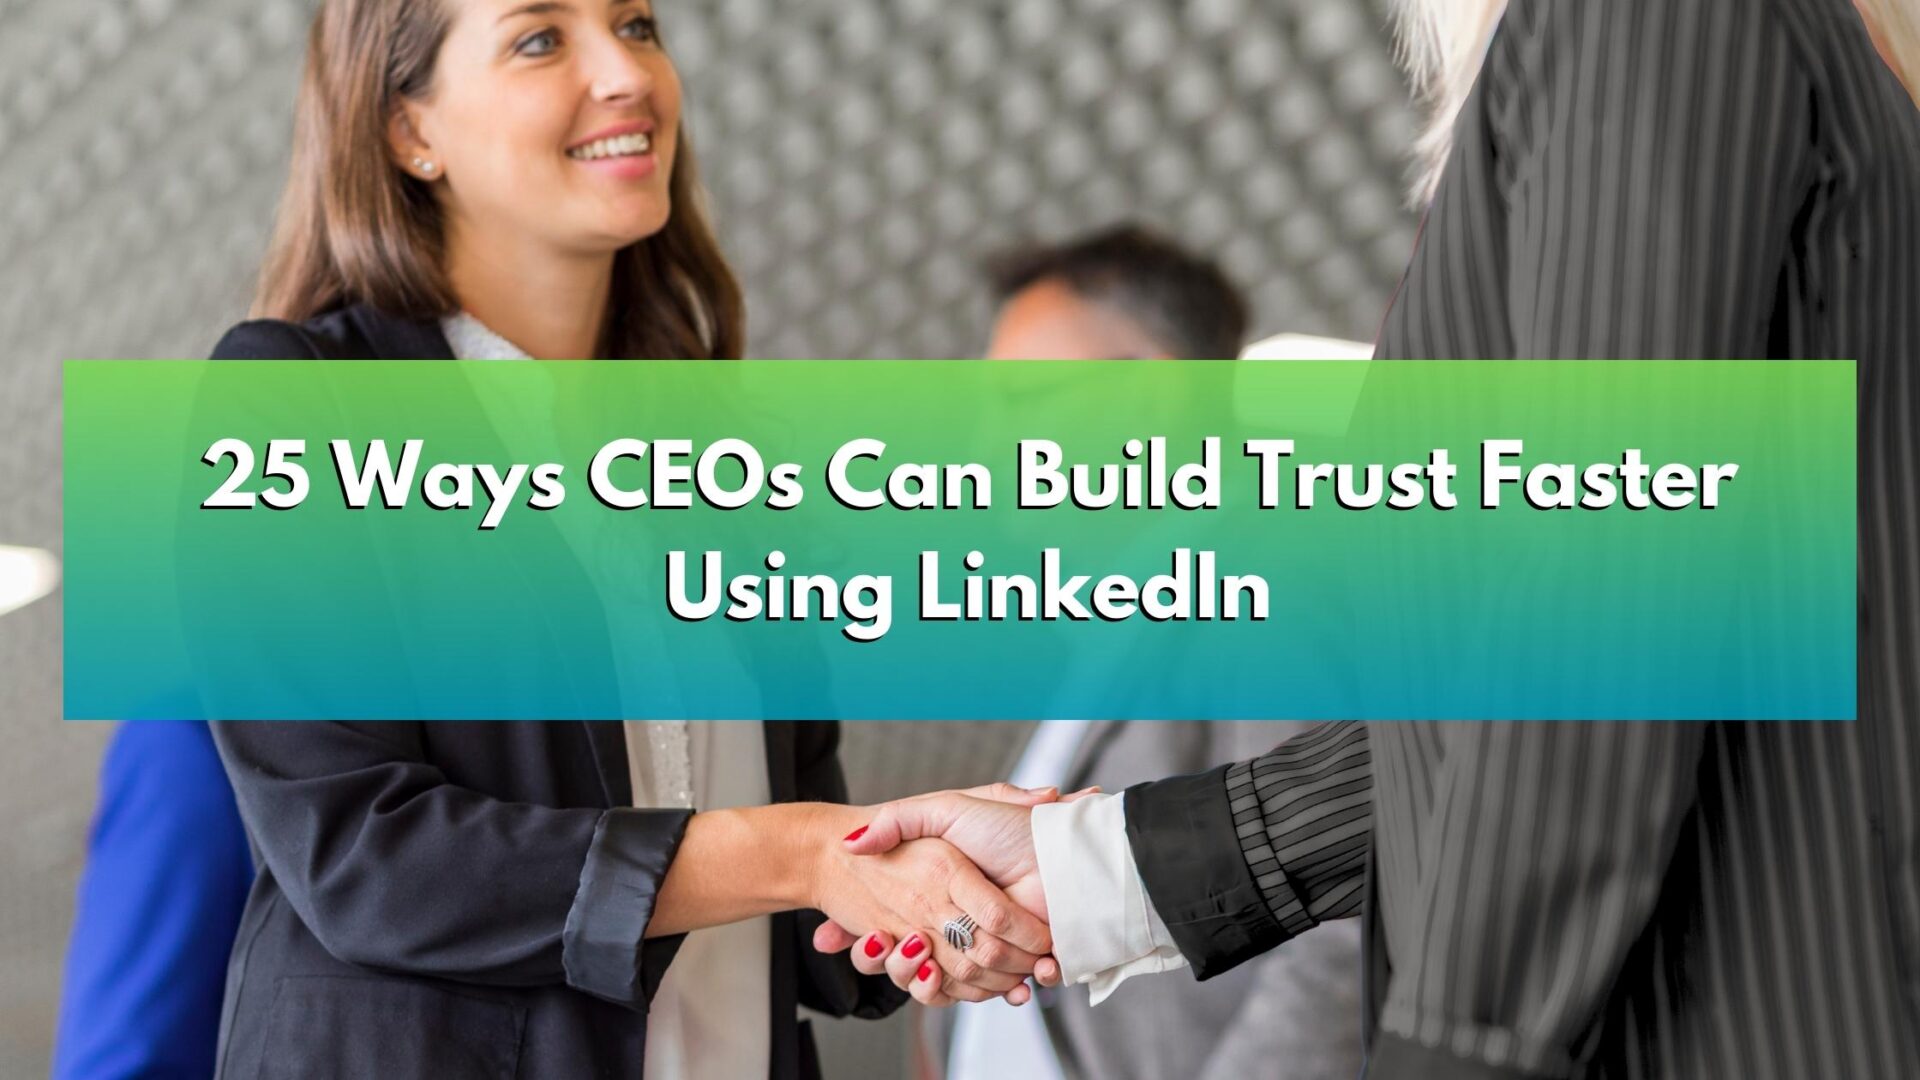 CEOs meeting at an event and fostering trust from LinkedIn